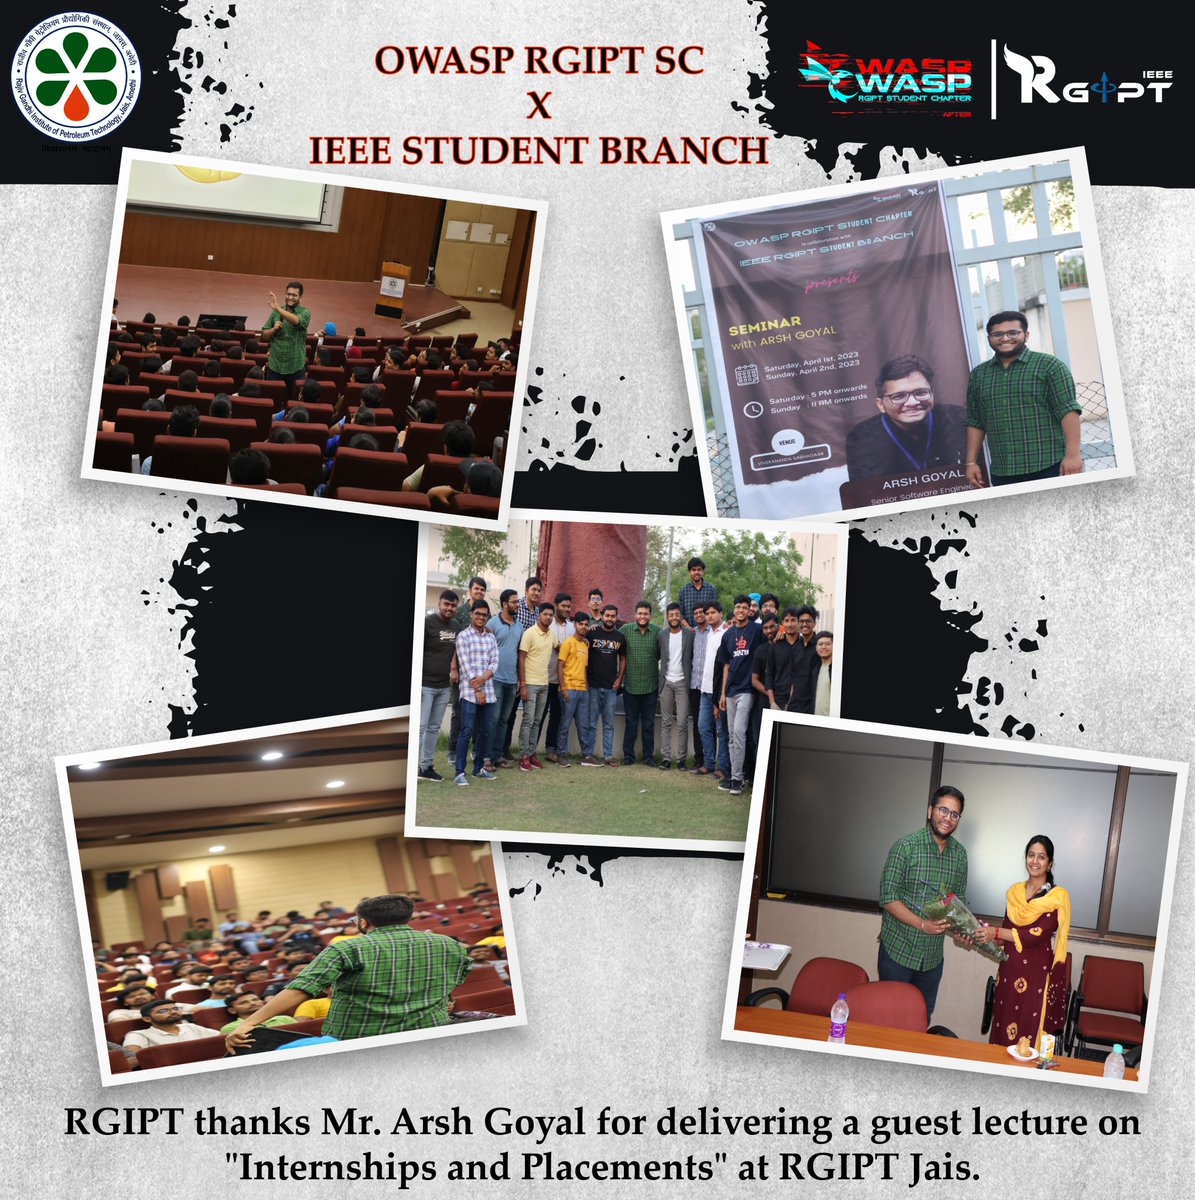 Lecture delivered by Mr. Arsh Goyal, Senior Software Engineer Samsung on Internship and Placement organized by IEEE SB and OWASP RGIPT Rajiv Gandhi Institute of Petroleum Technology, Jais, Amethi
#RGIPT | #mopng | #guestlecture